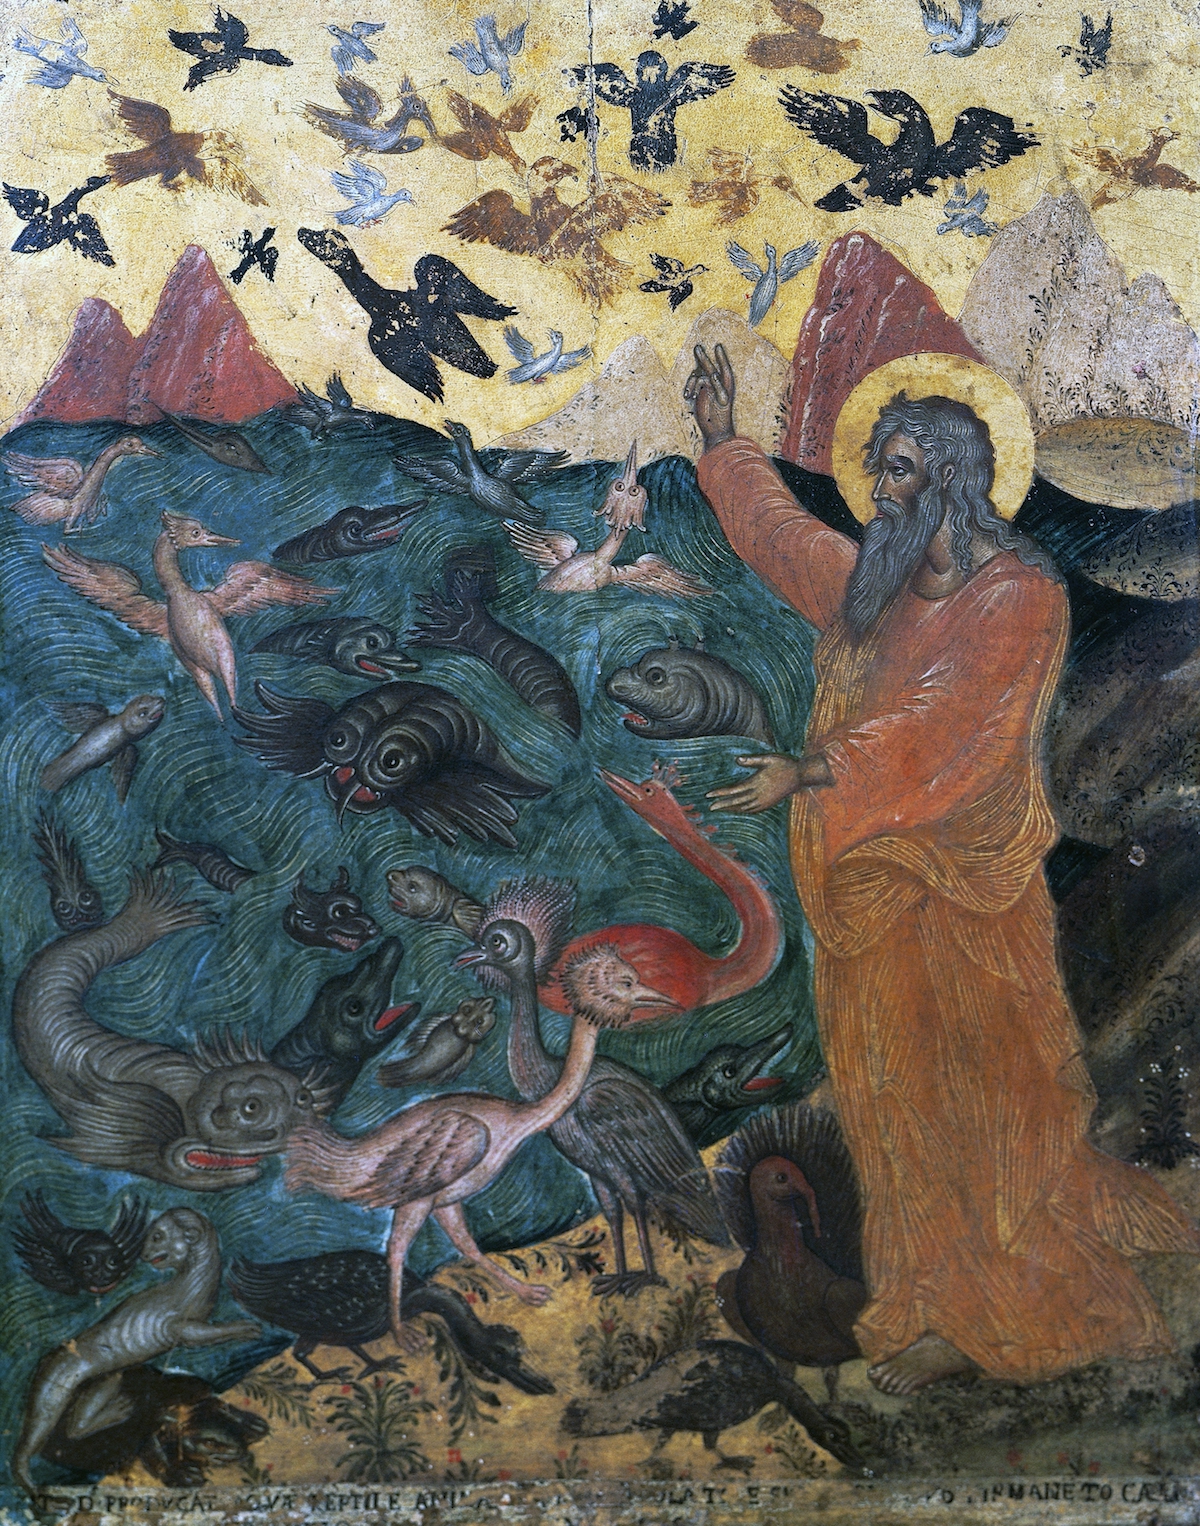 a very old painting with a bearded male figure on the right with a gold halo and reddish robe. He stands in front of a sea filled with elaborately drawn fish and a golden sky full of birds